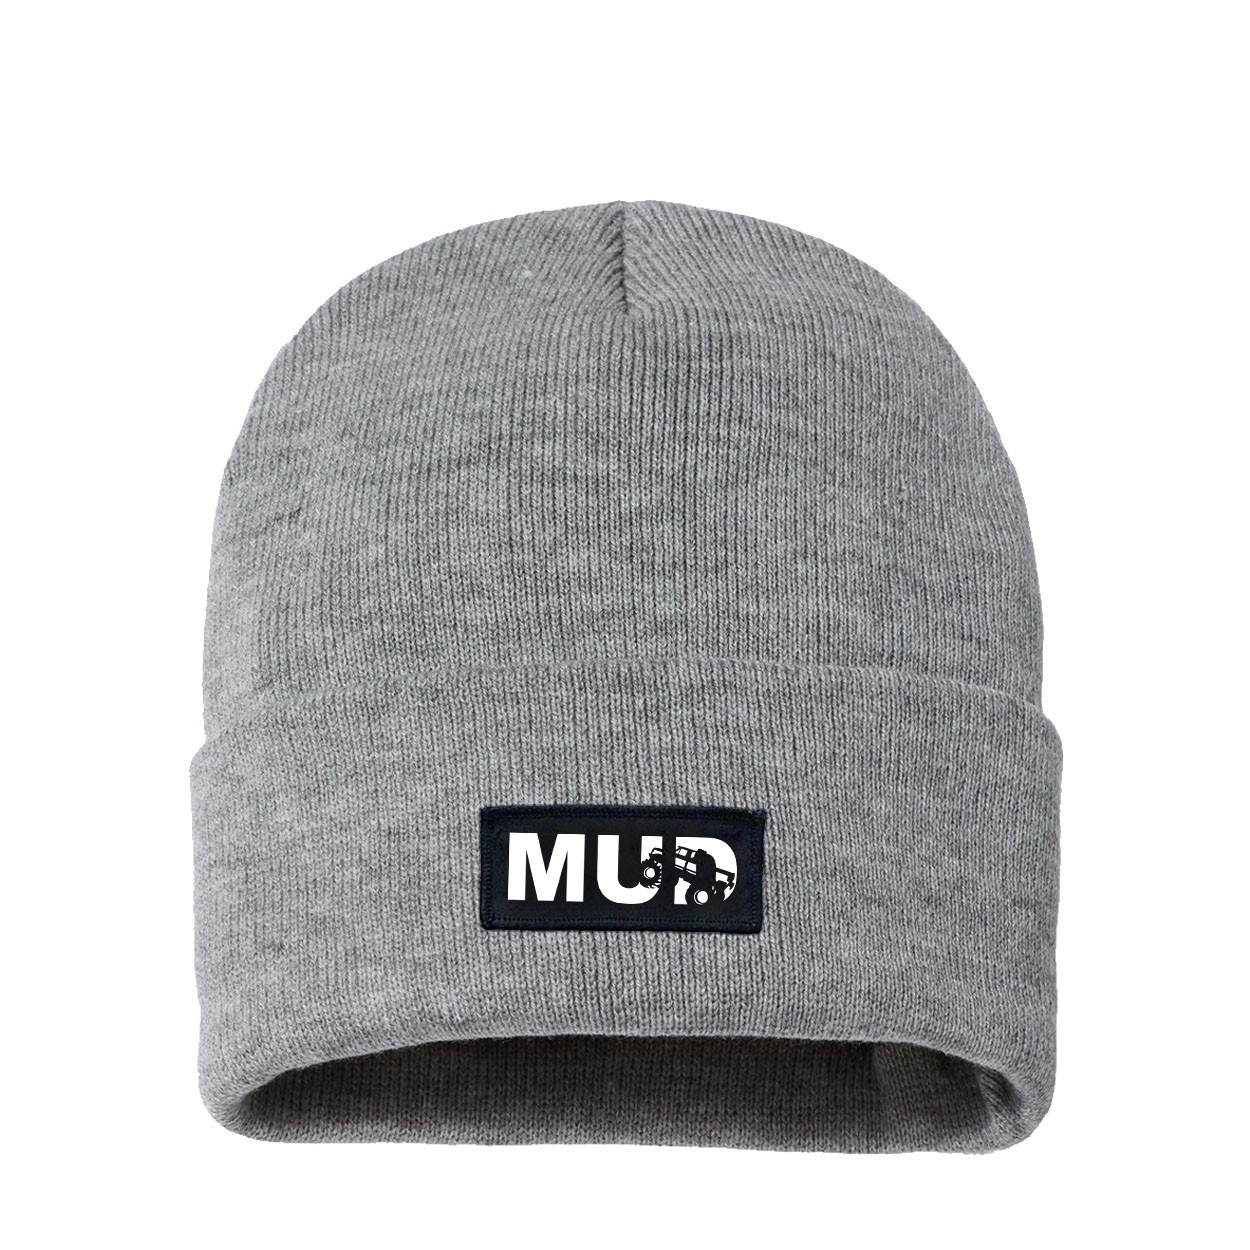 Mud Truck Logo Night Out Woven Patch Night Out Sherpa Lined Cuffed Beanie Heather Gray (White Logo)